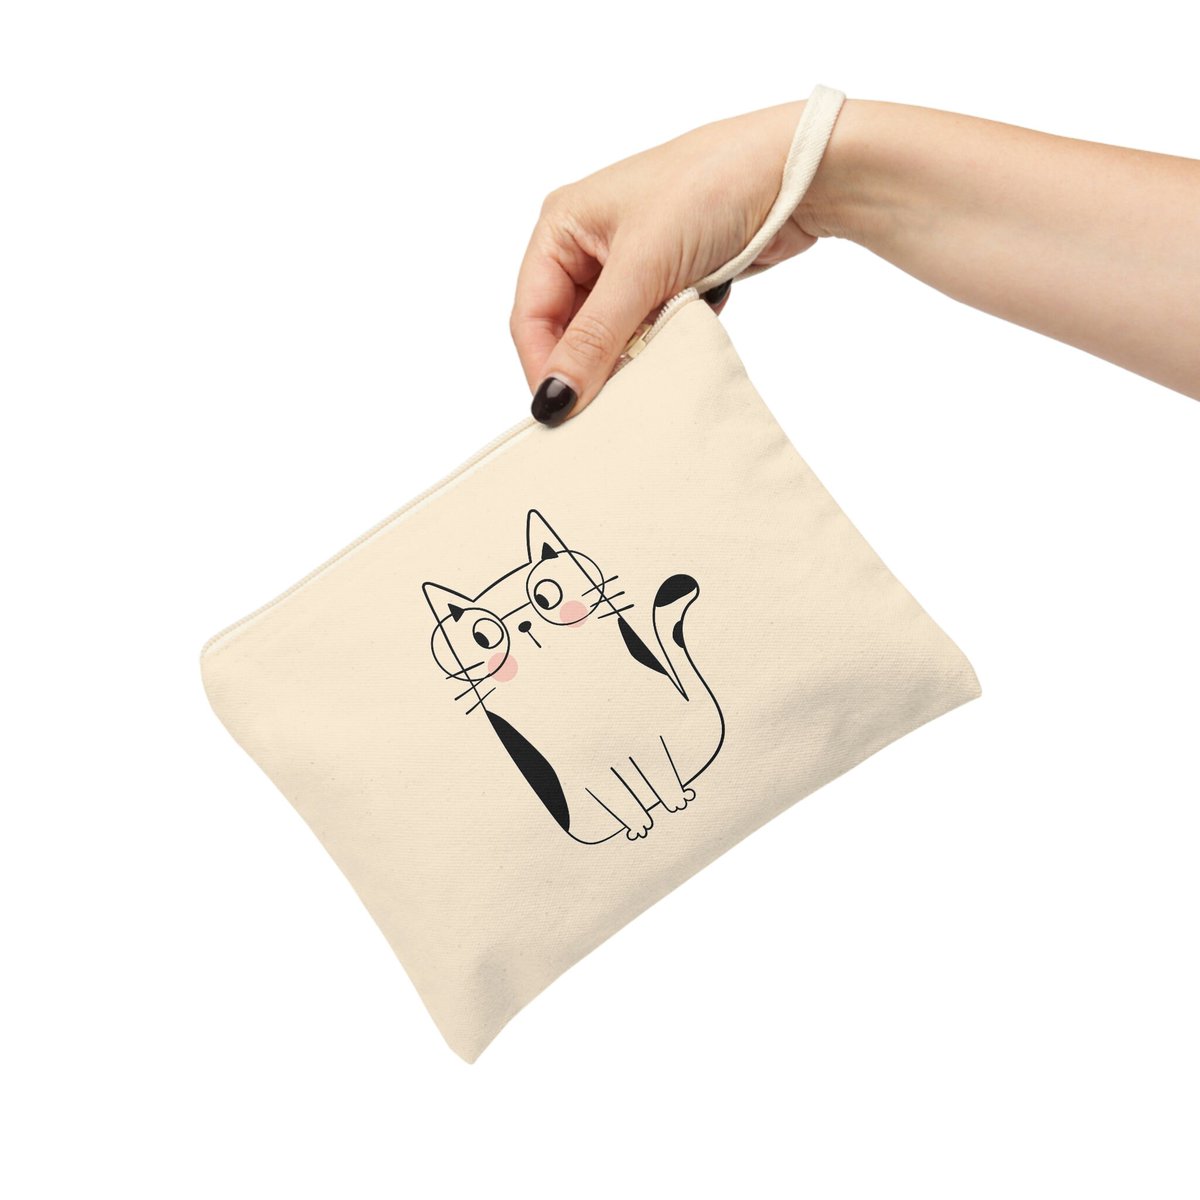 🐱 Keep your essentials close with this adorable cat zipper pouch! Perfect for cat lovers and anyone who needs a cute and practical accessory. #catlovers #zipperpouch #cuteaccessories #dailyessentials #giftidea etsy.me/42oCu40